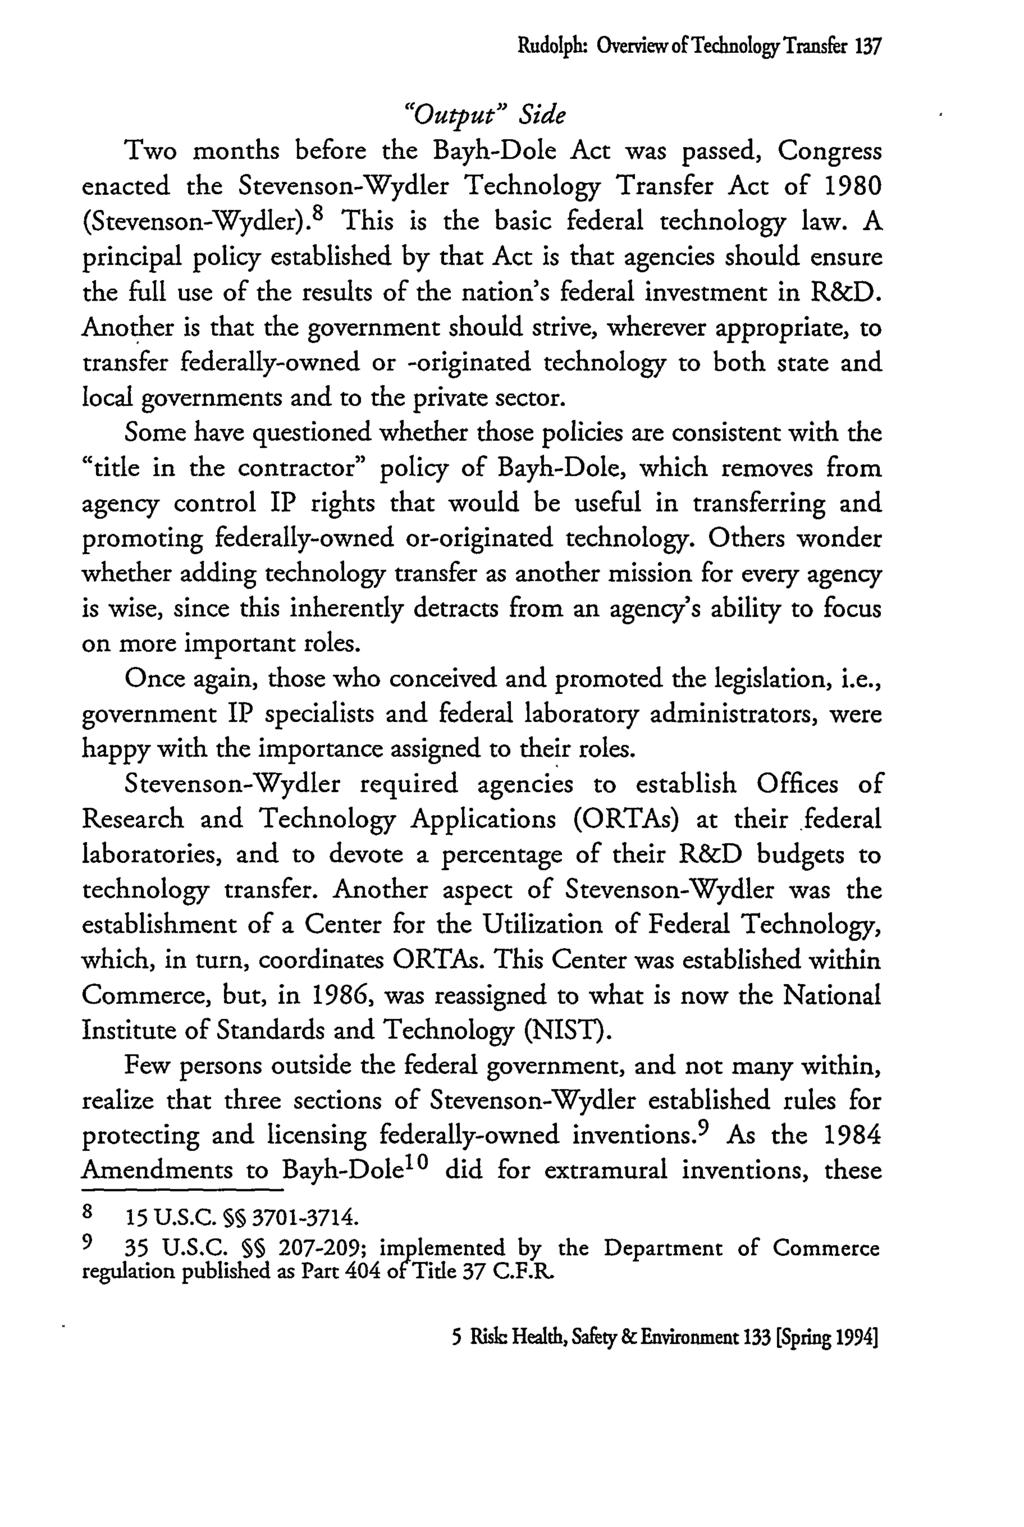 Rudolph. Overview oftechnologytransfer 137 "Output" Side Two months before the Bayh-Dole Act was passed, Congress enacted the Stevenson-Wydler Technology Transfer Act of 1980 (Stevenson-Wydler).